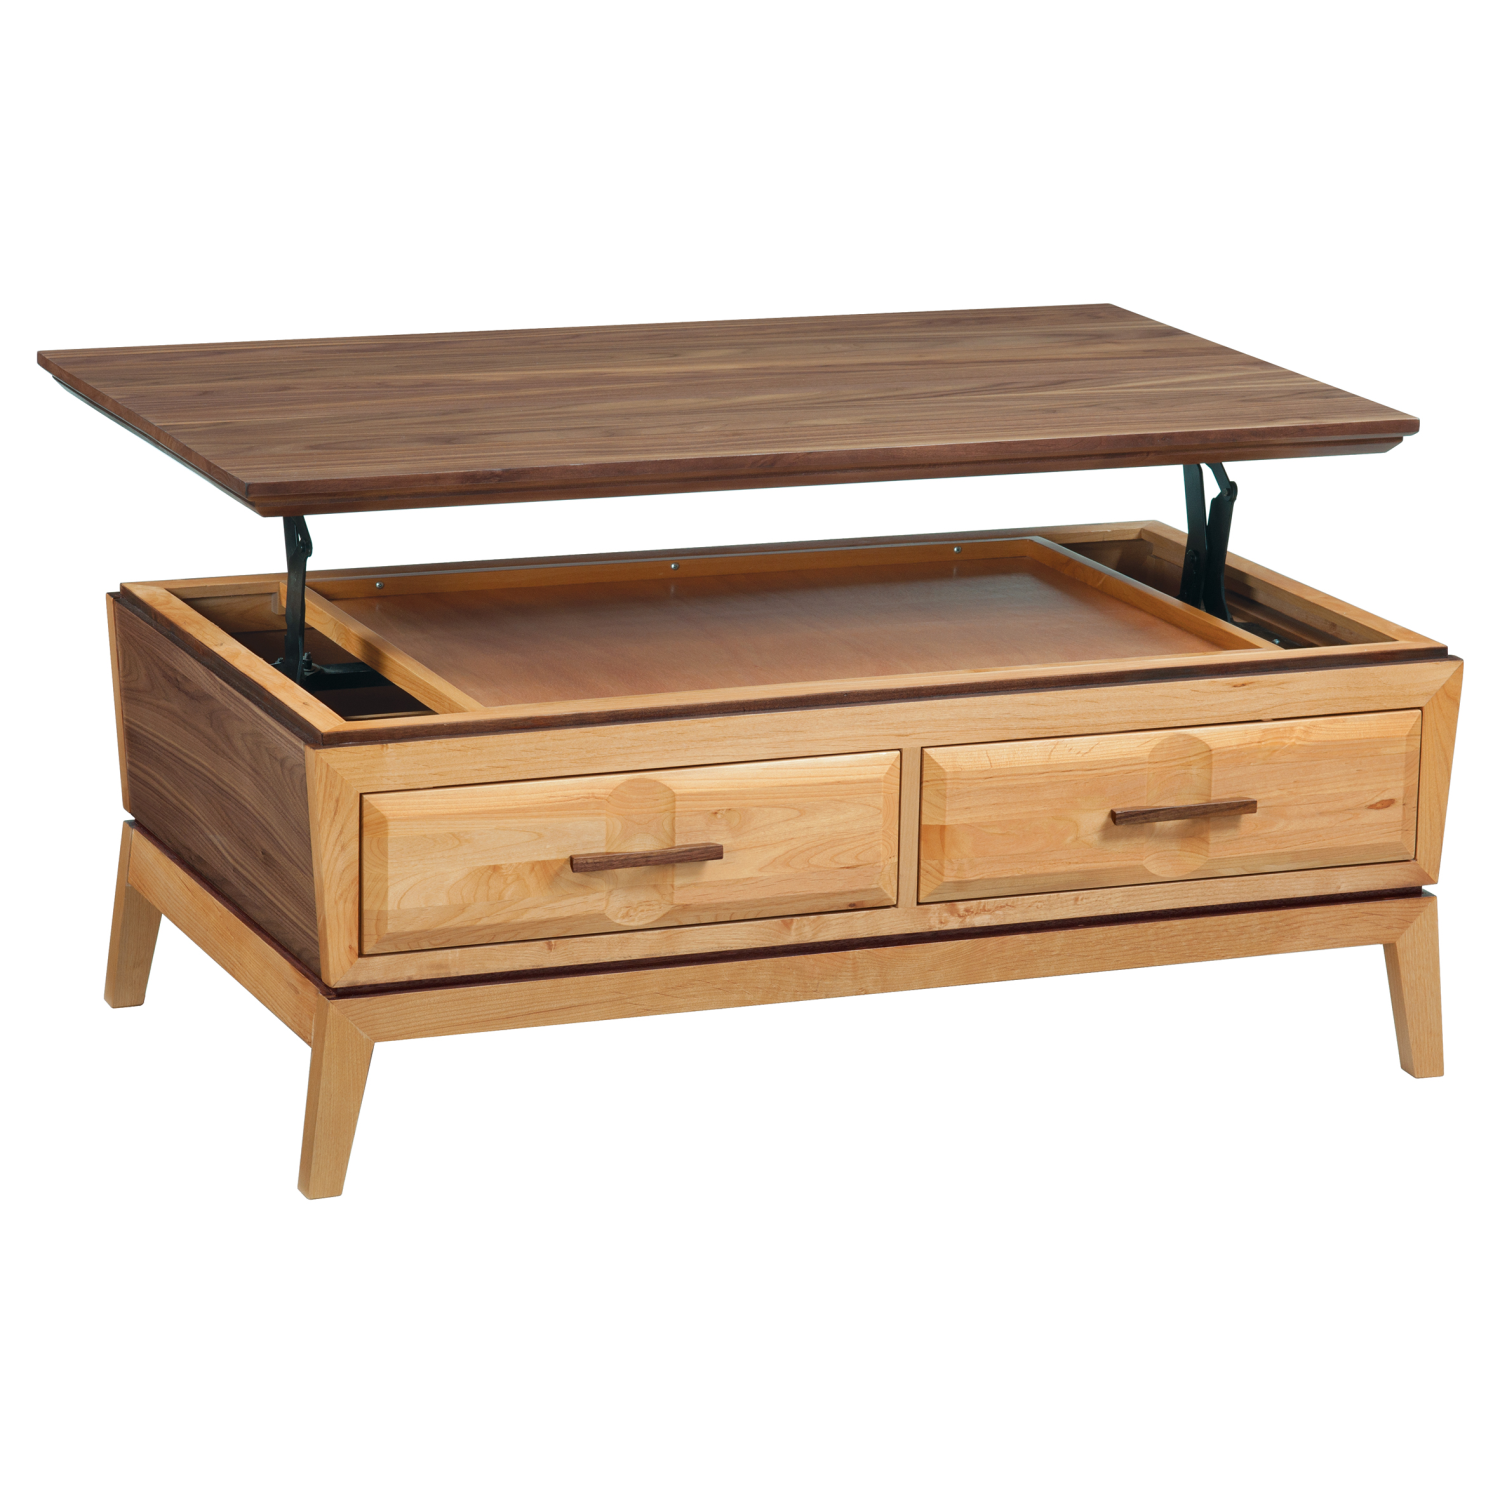 Addison Lift Top Coffee Table Image with Top Lifted